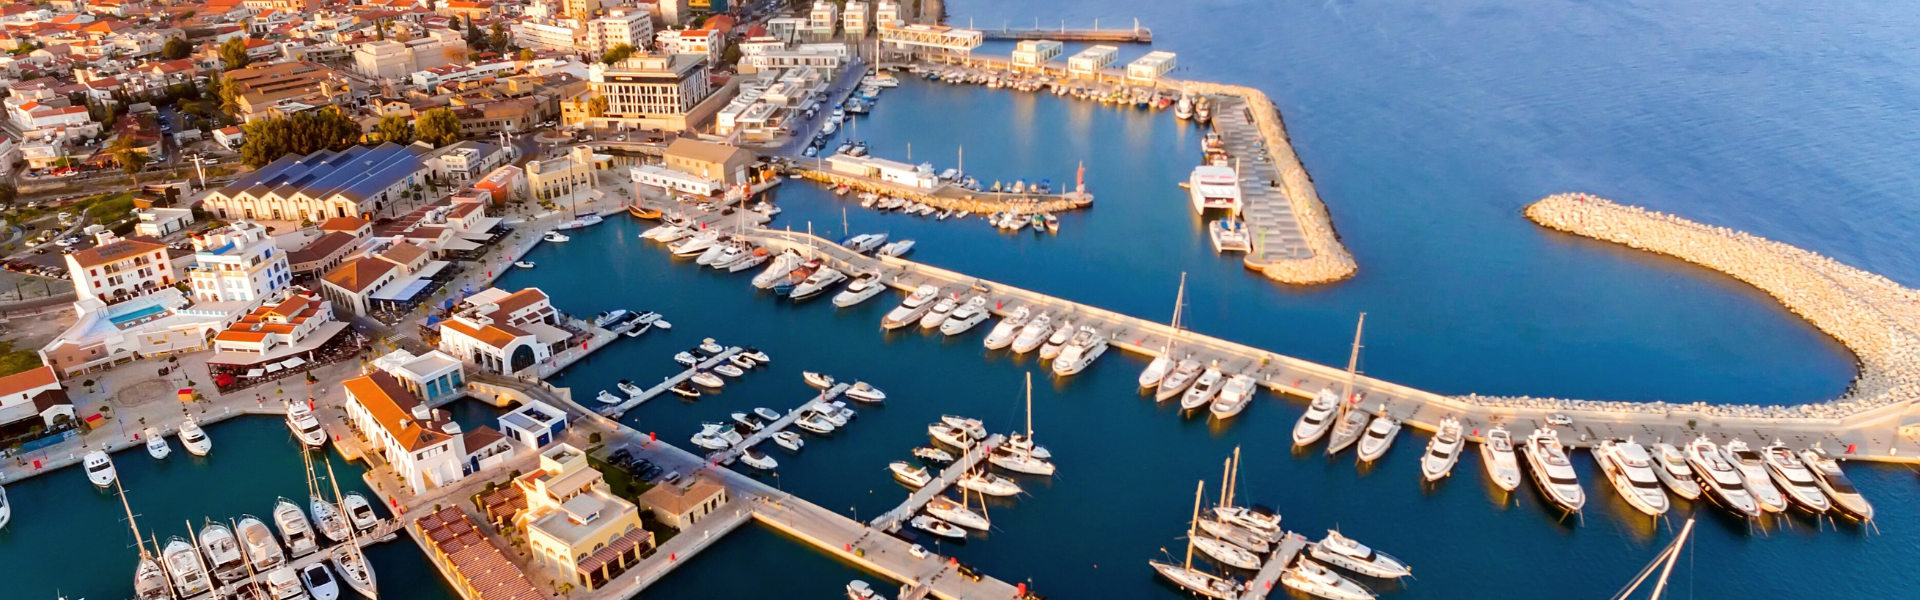 Limassol, Cyprus, photo of the downtown Marina & Old Port